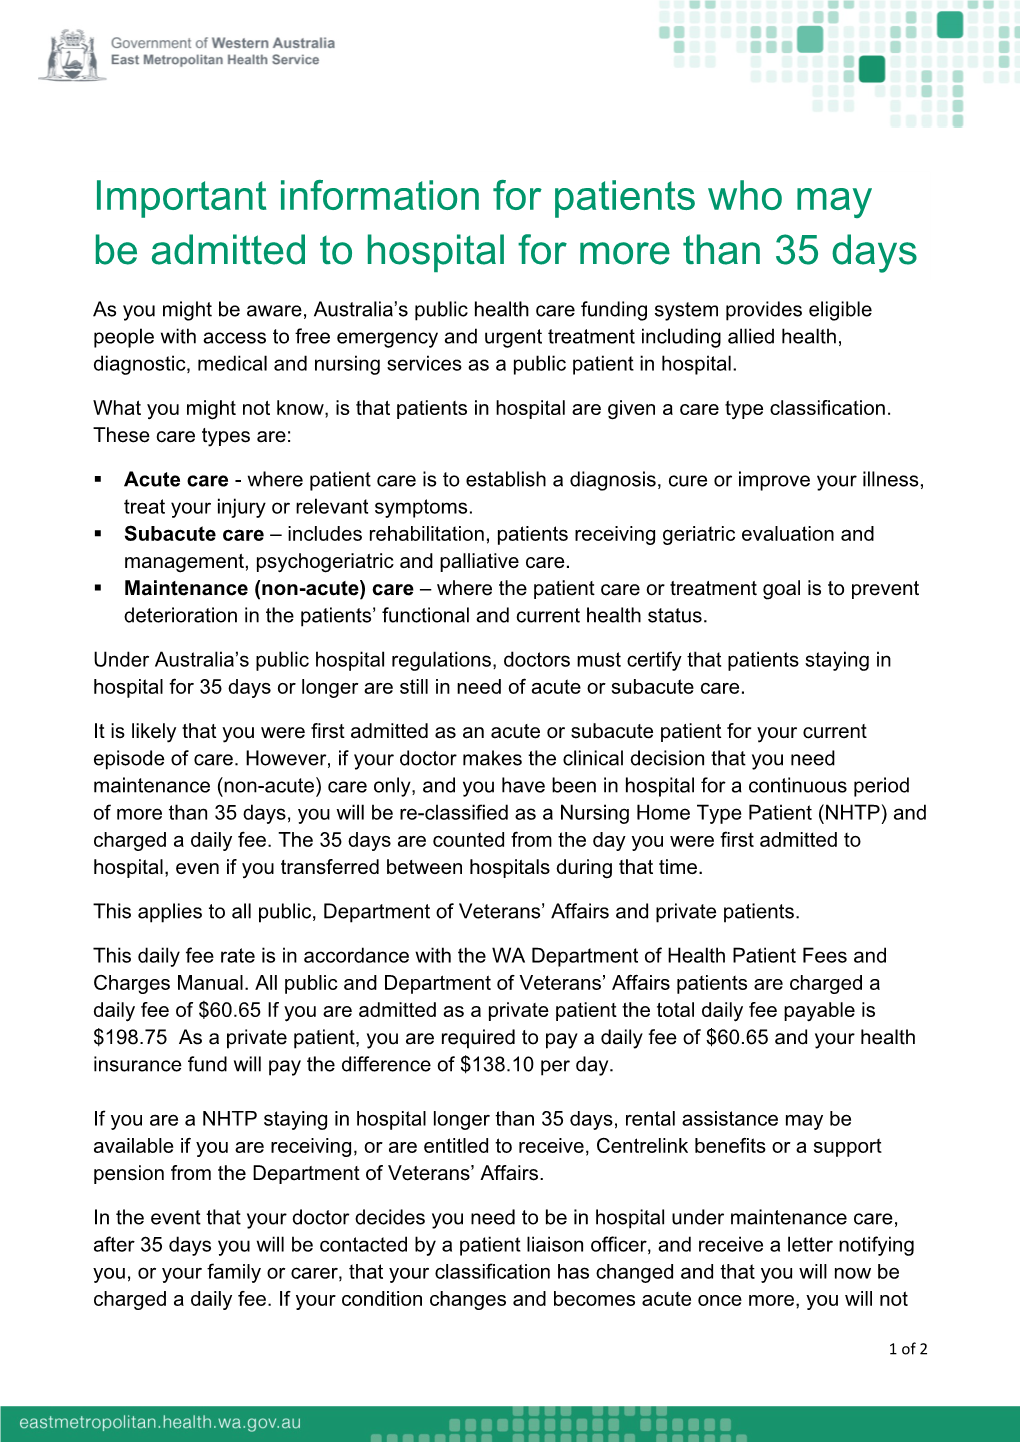 Important Information for Patients Who May Be Admitted to Hospital for More Than 35 Days